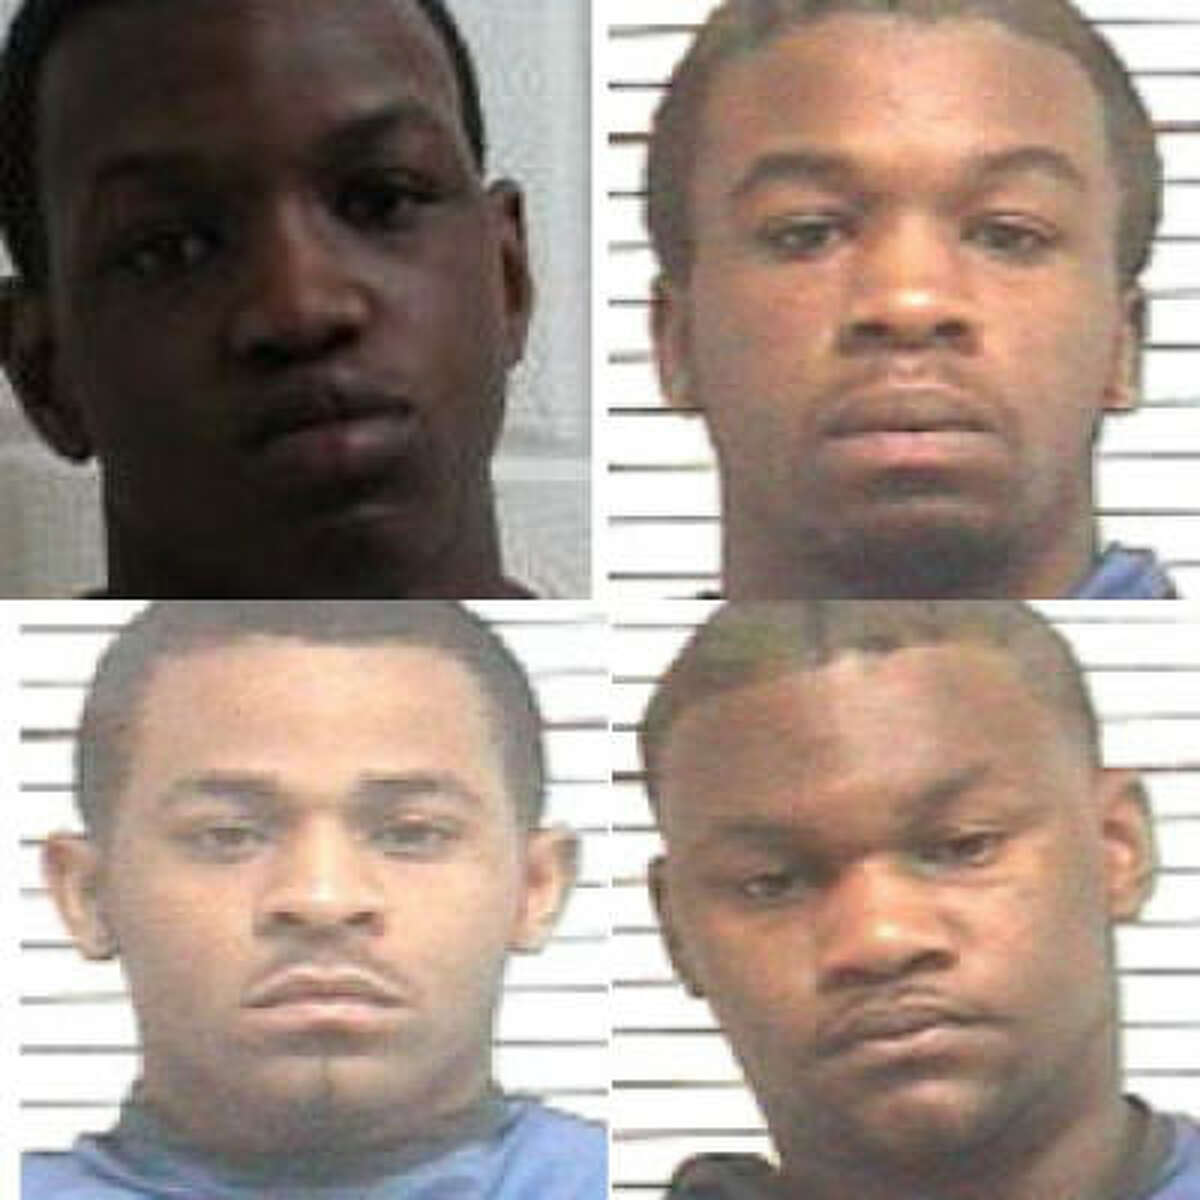 The suspects in the brutal attack are (from top, left) Jared Len Cruse, 18; Timothy Daray Ellis, 19; (from bottom, left) Rayford Tyrone Ellis Jr., 19, and Isaiah Rashad Ross, 21.